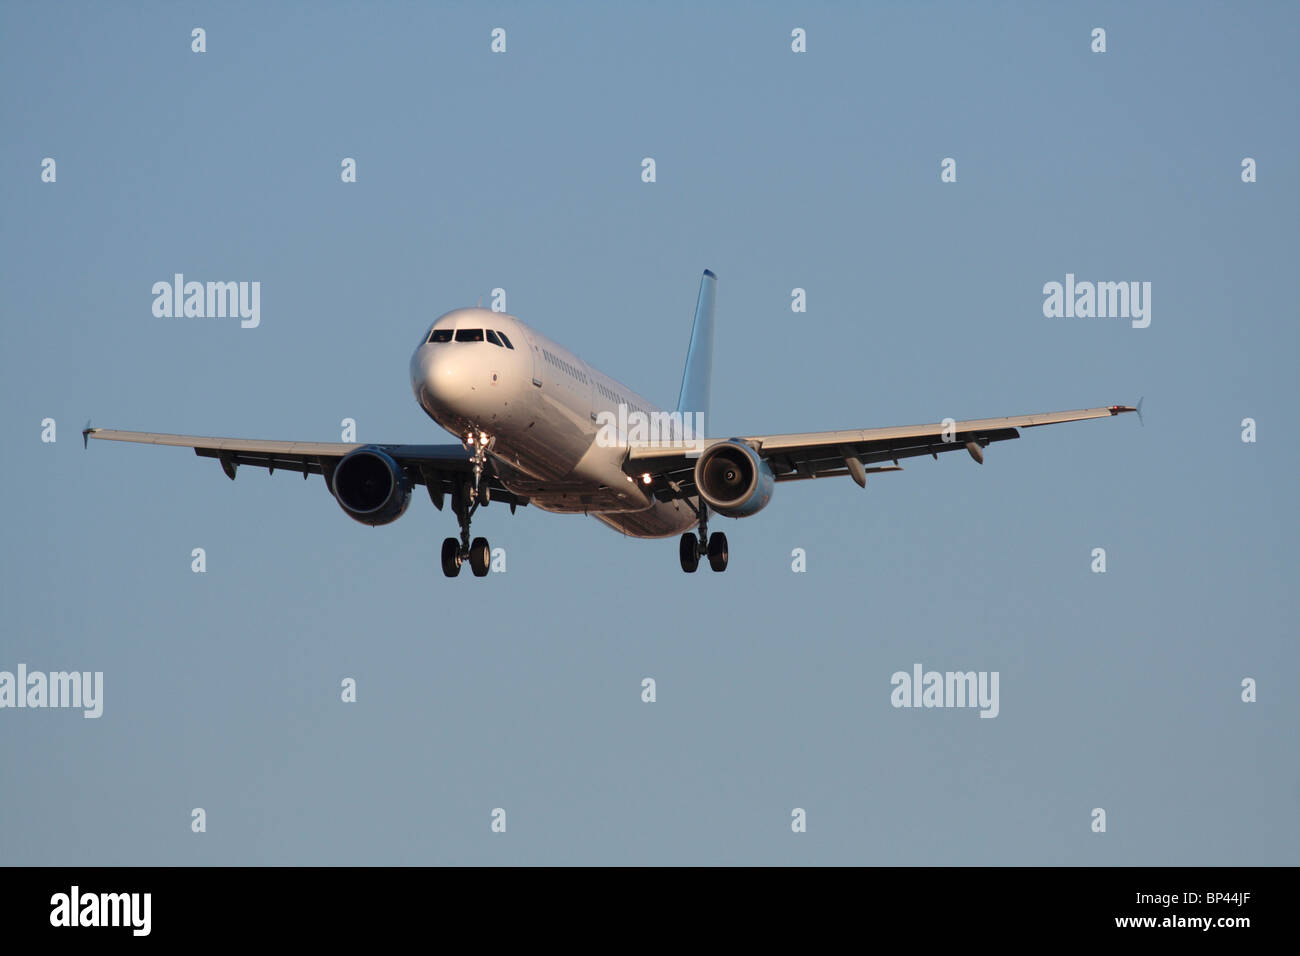 Air travel. Airbus A321 narrowbody commercial passenger jet plane flying on approach in a blue sky. Front view with proprietary details deleted. Stock Photo